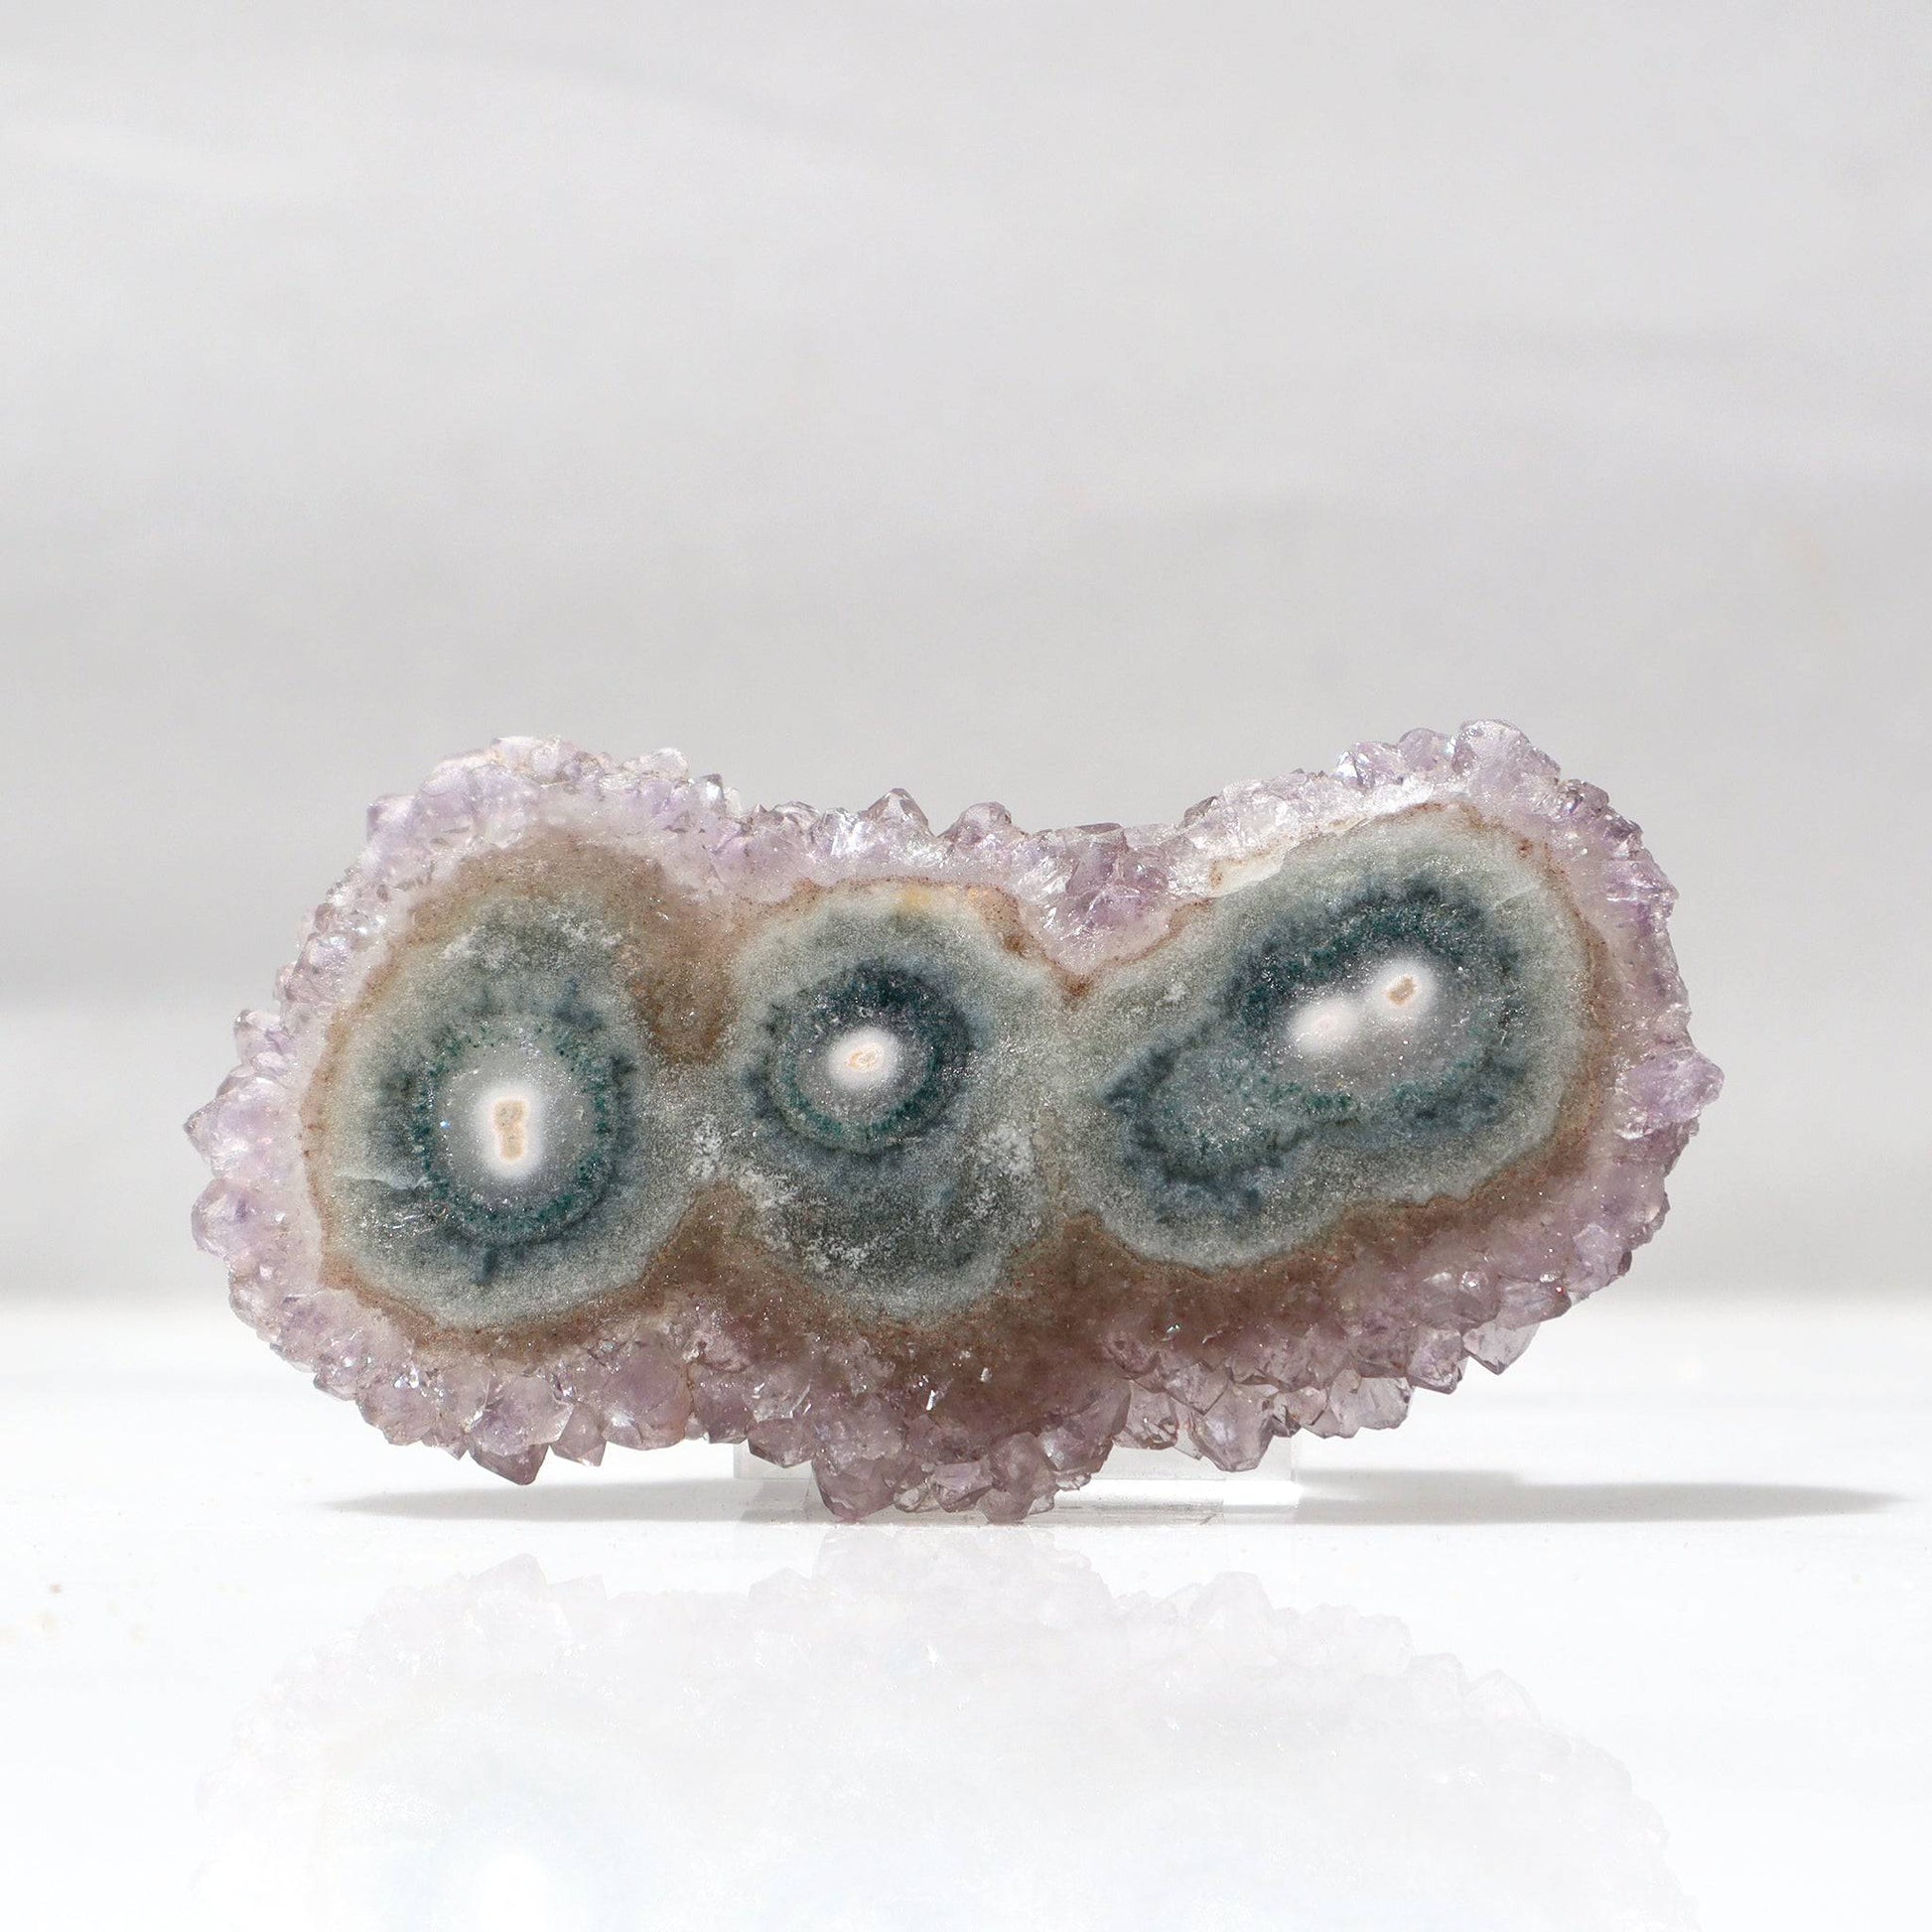 This particular stalactite slice resembles a playful caterpillar with a triple center of dainty green agate with bordering lilac crystals as a complete composition of harmonic mineral balance and beauty.   